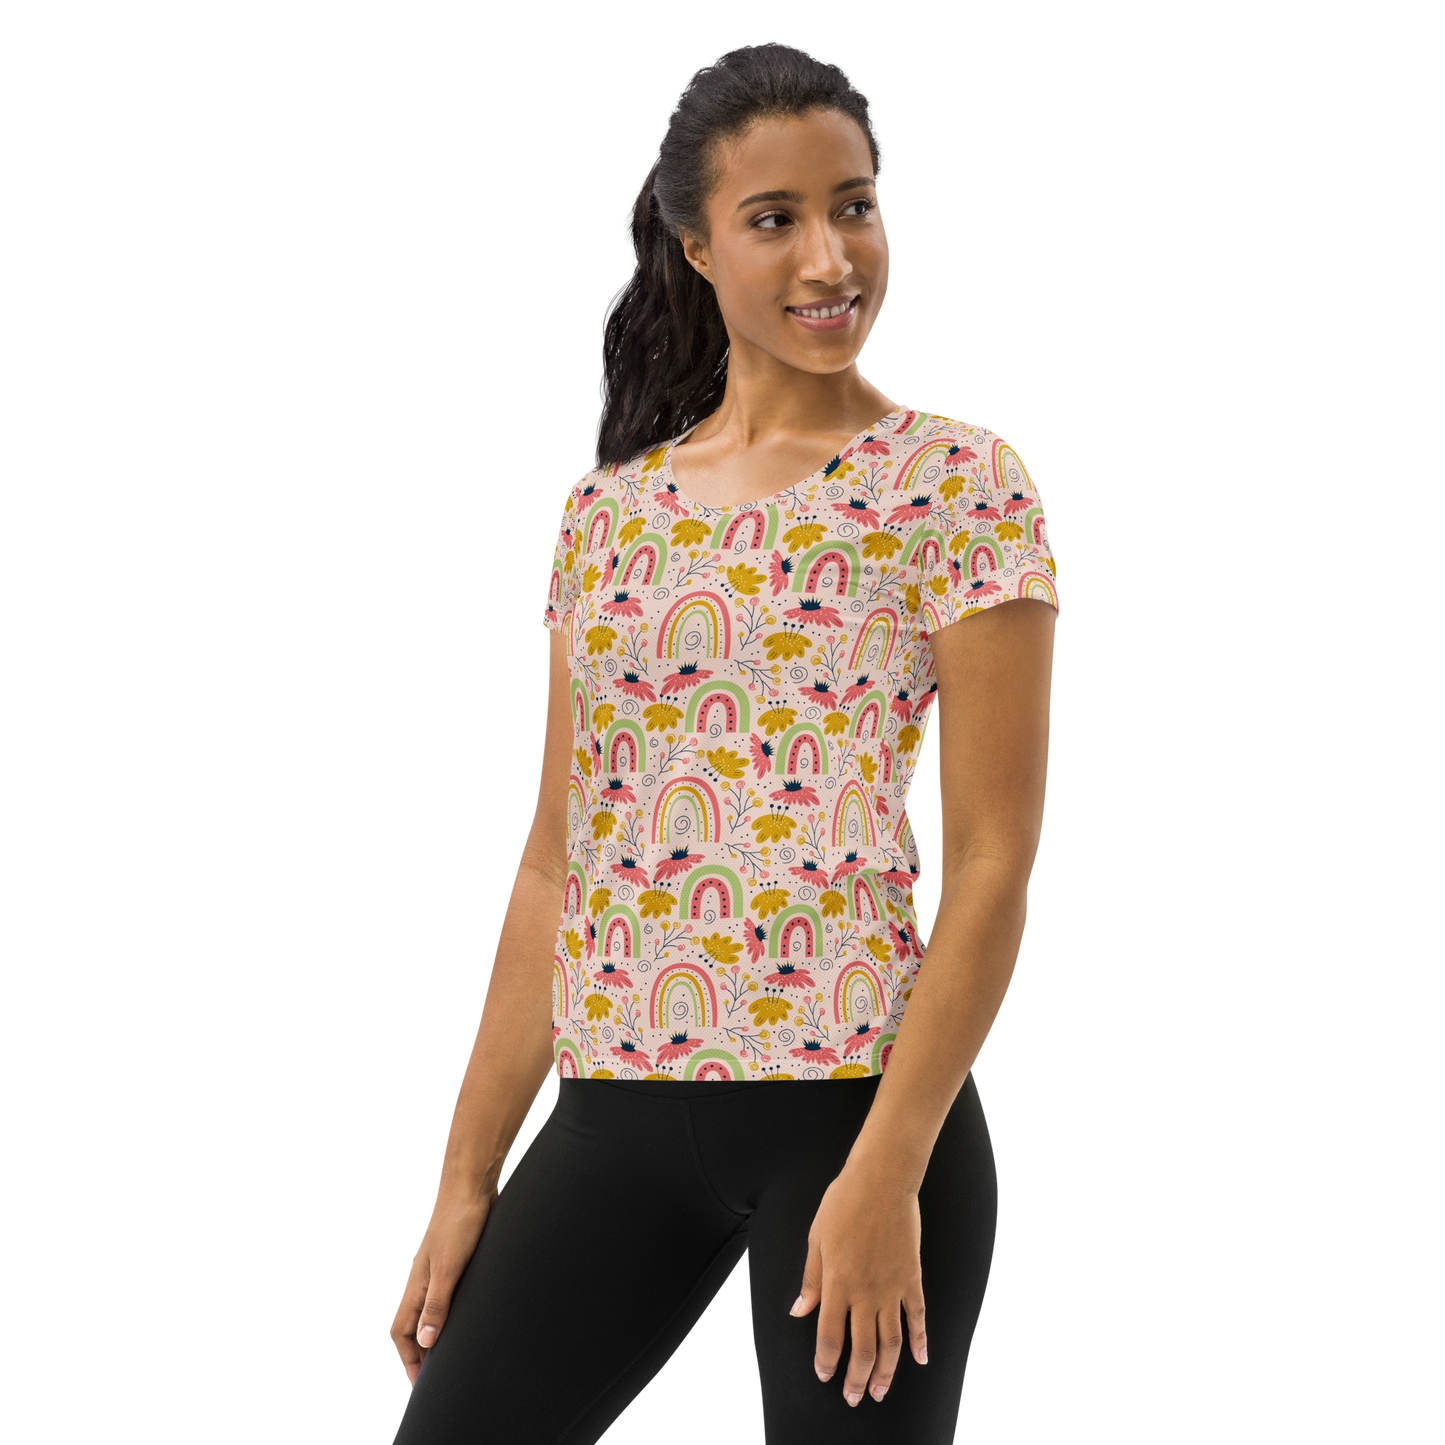 Scandinavian Spring Floral | Seamless Patterns | All-Over Print Women's Athletic T-Shirt - #7